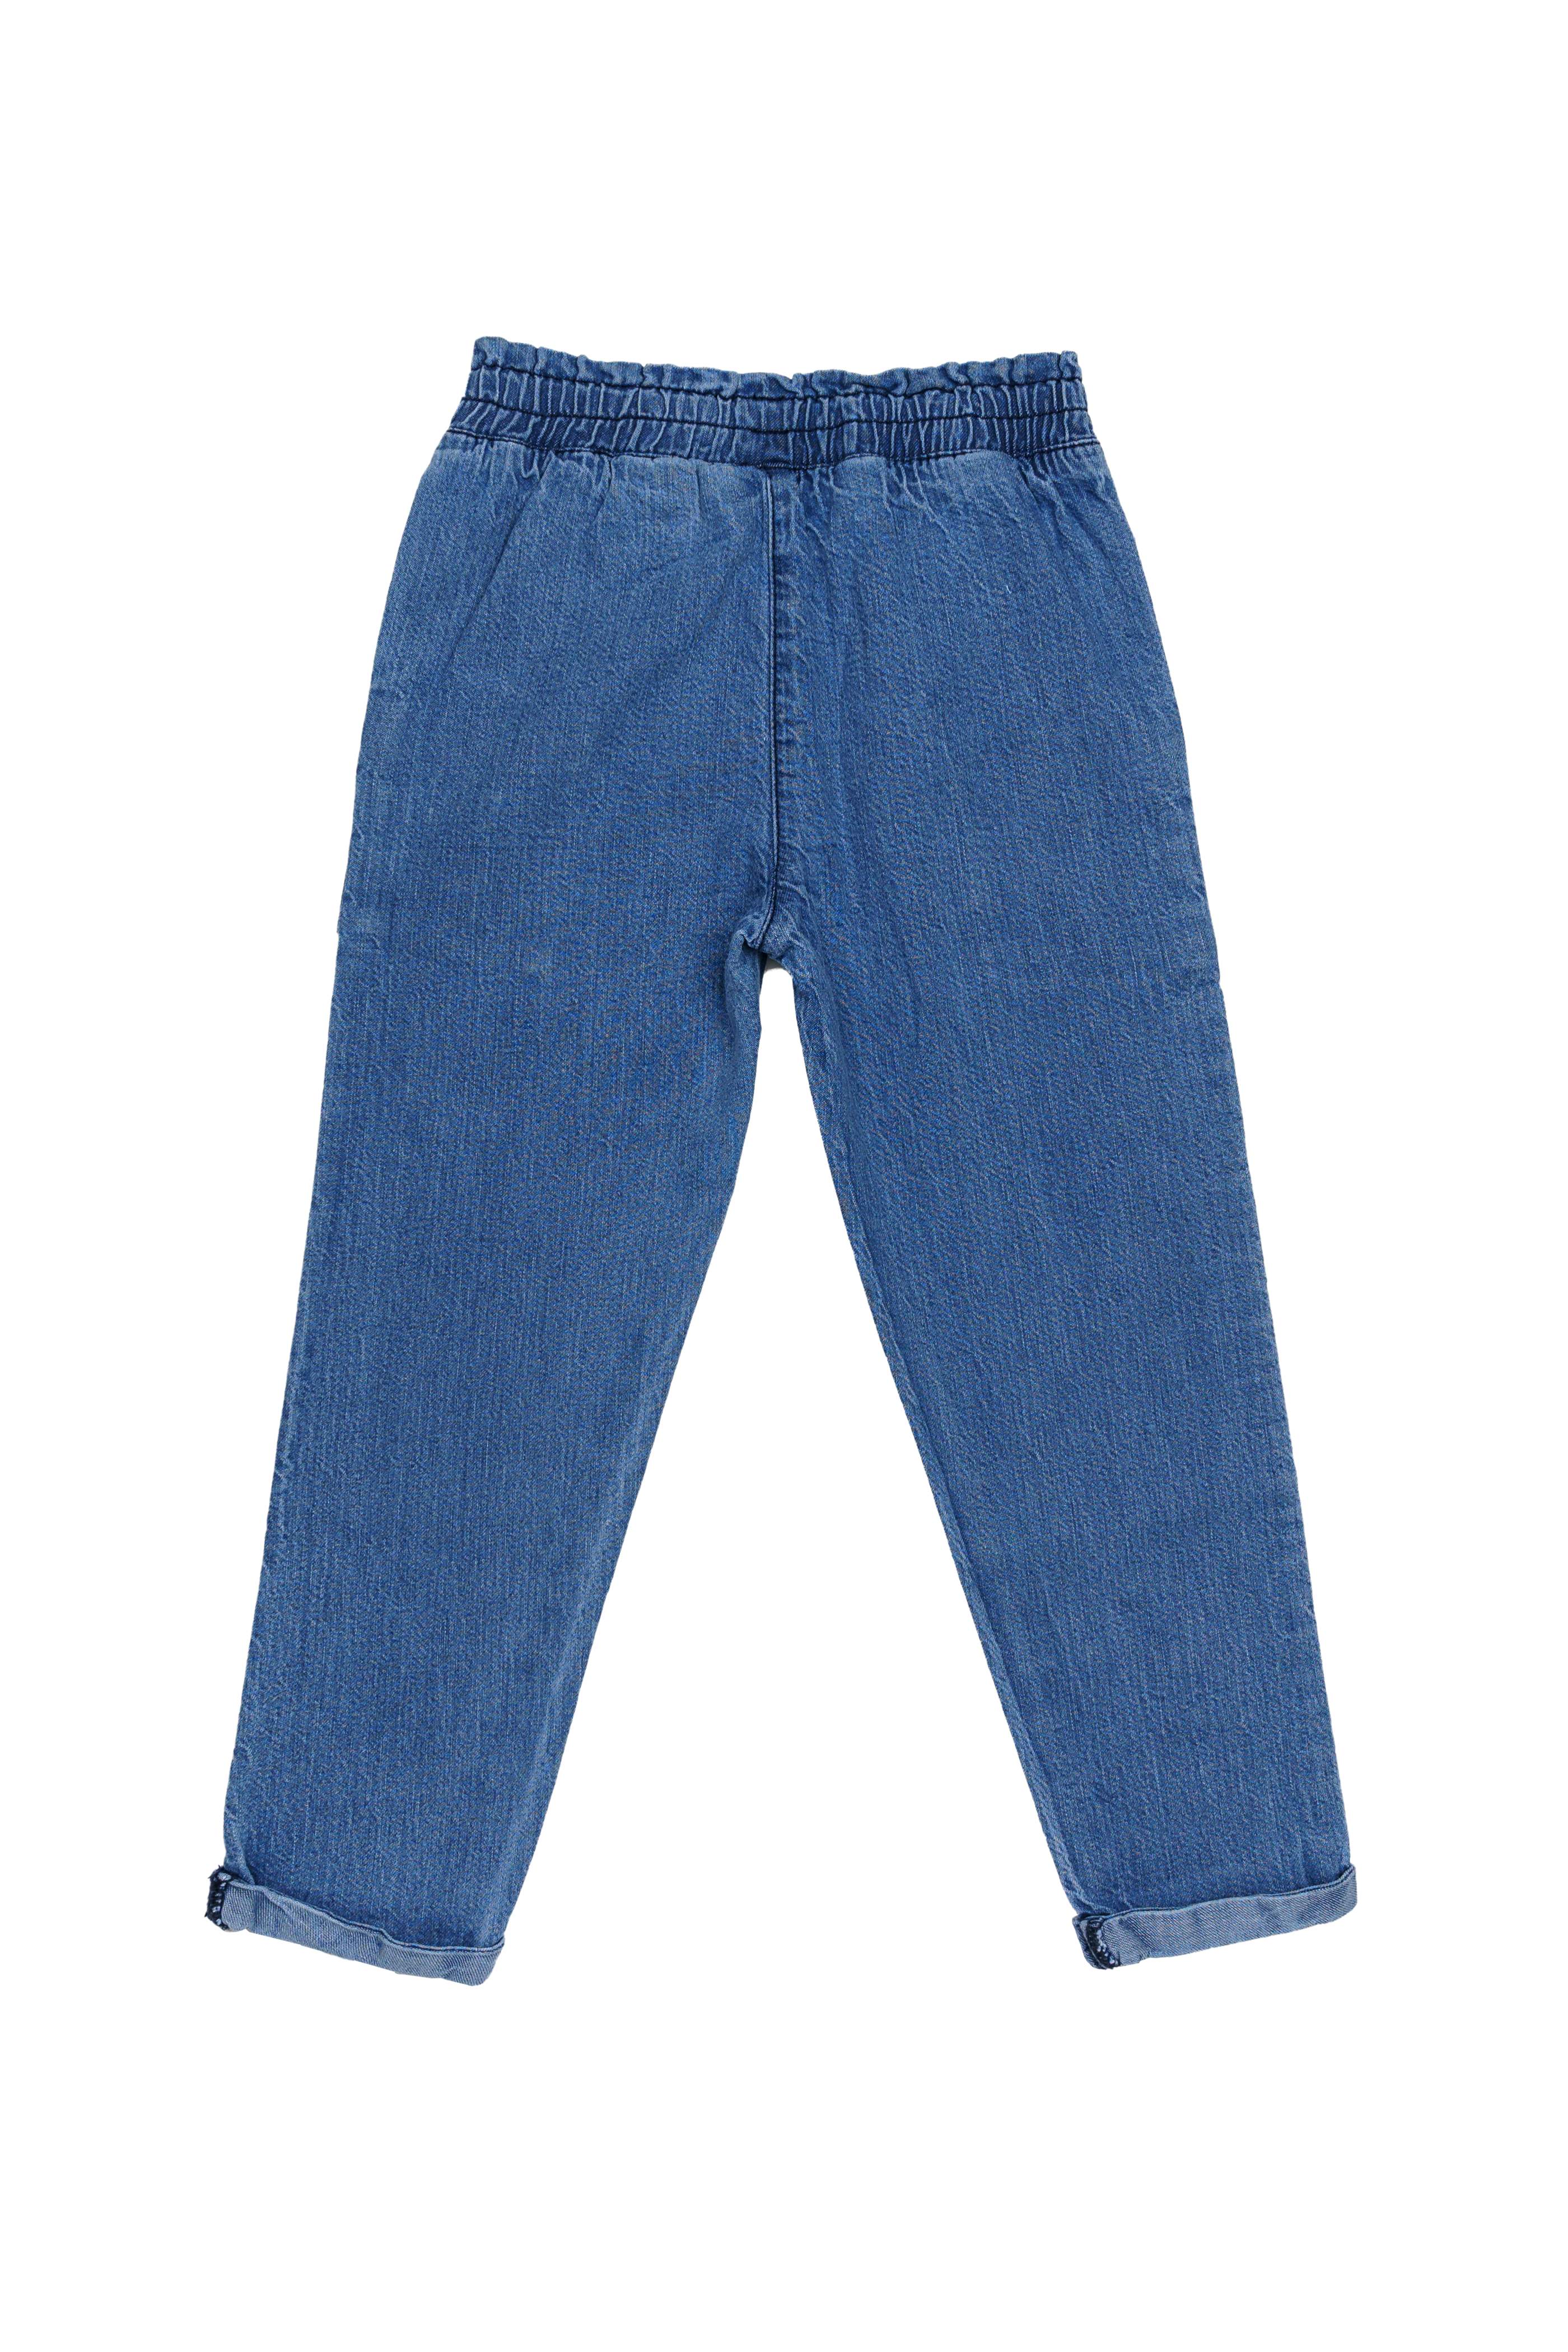 H by Hamleys Girls Embroidered Blue Jeans